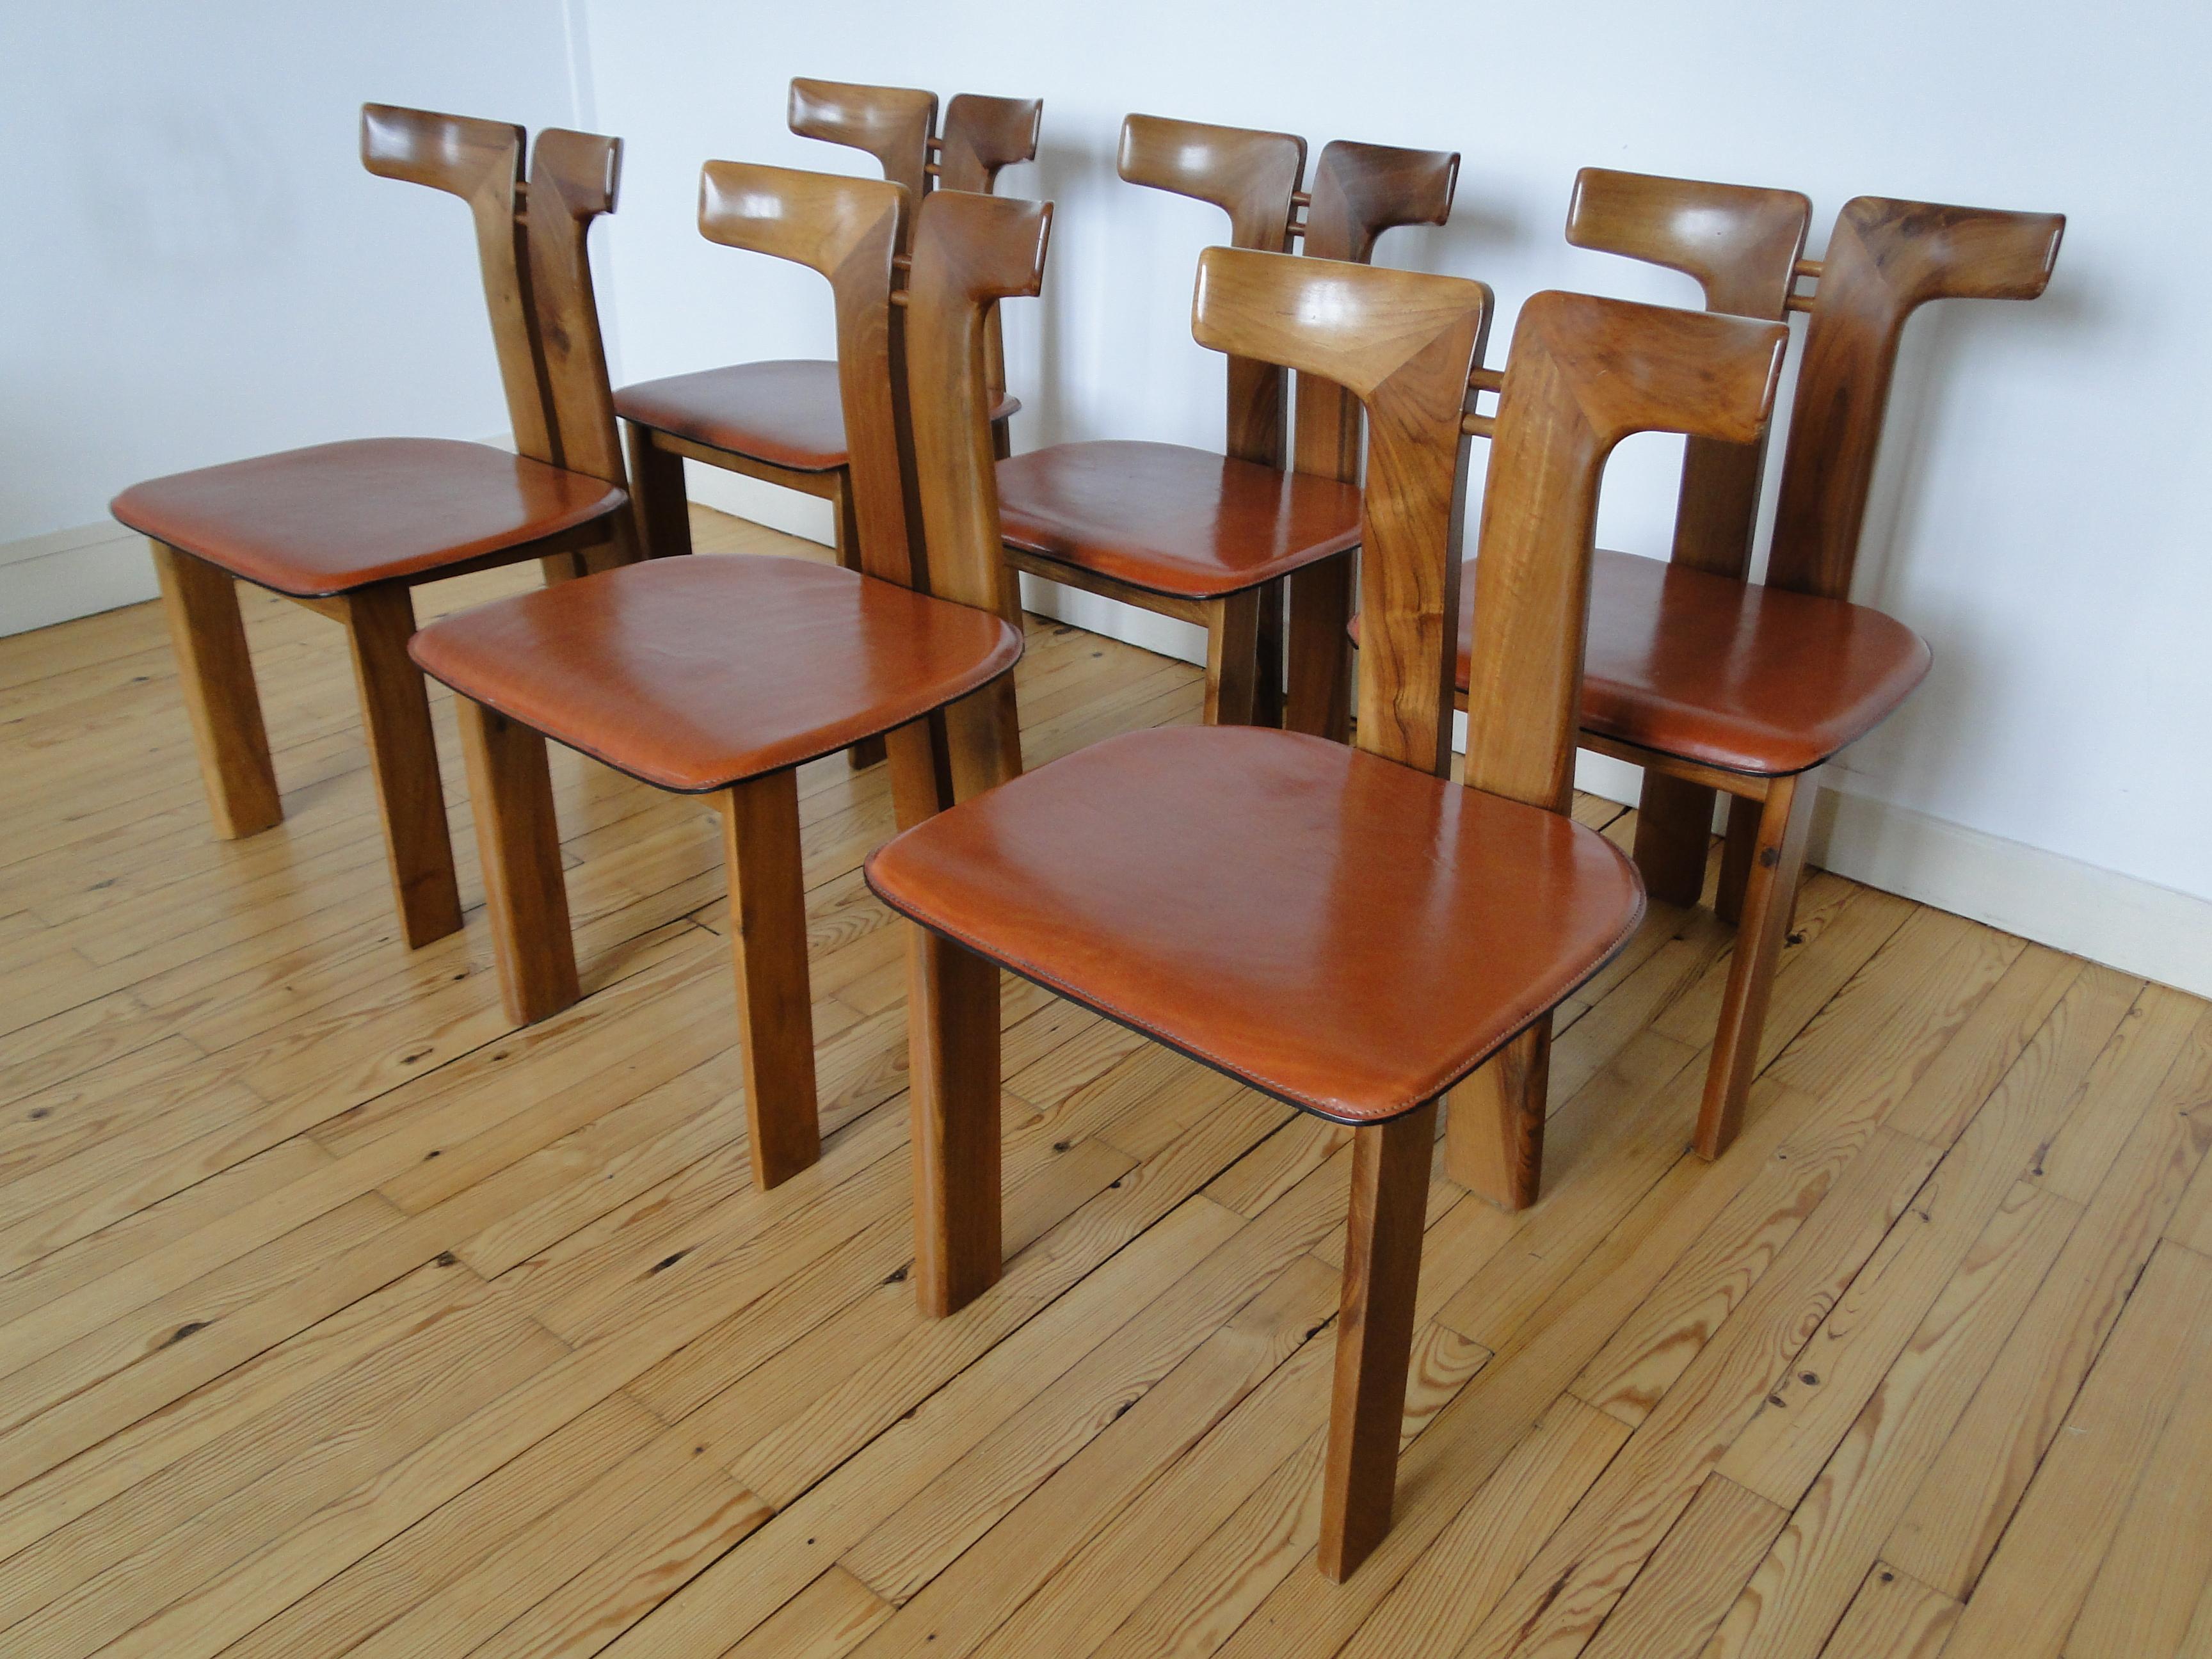 Pierre Cardin, set of 6 dining chairs, walnut, leather, Italy, circa 1970.

This sculptural chair is designed by the French designer Pierre Cardin (1922-2020).

 The curved back highlights the qualities of the wood and its shape in an unparalleled